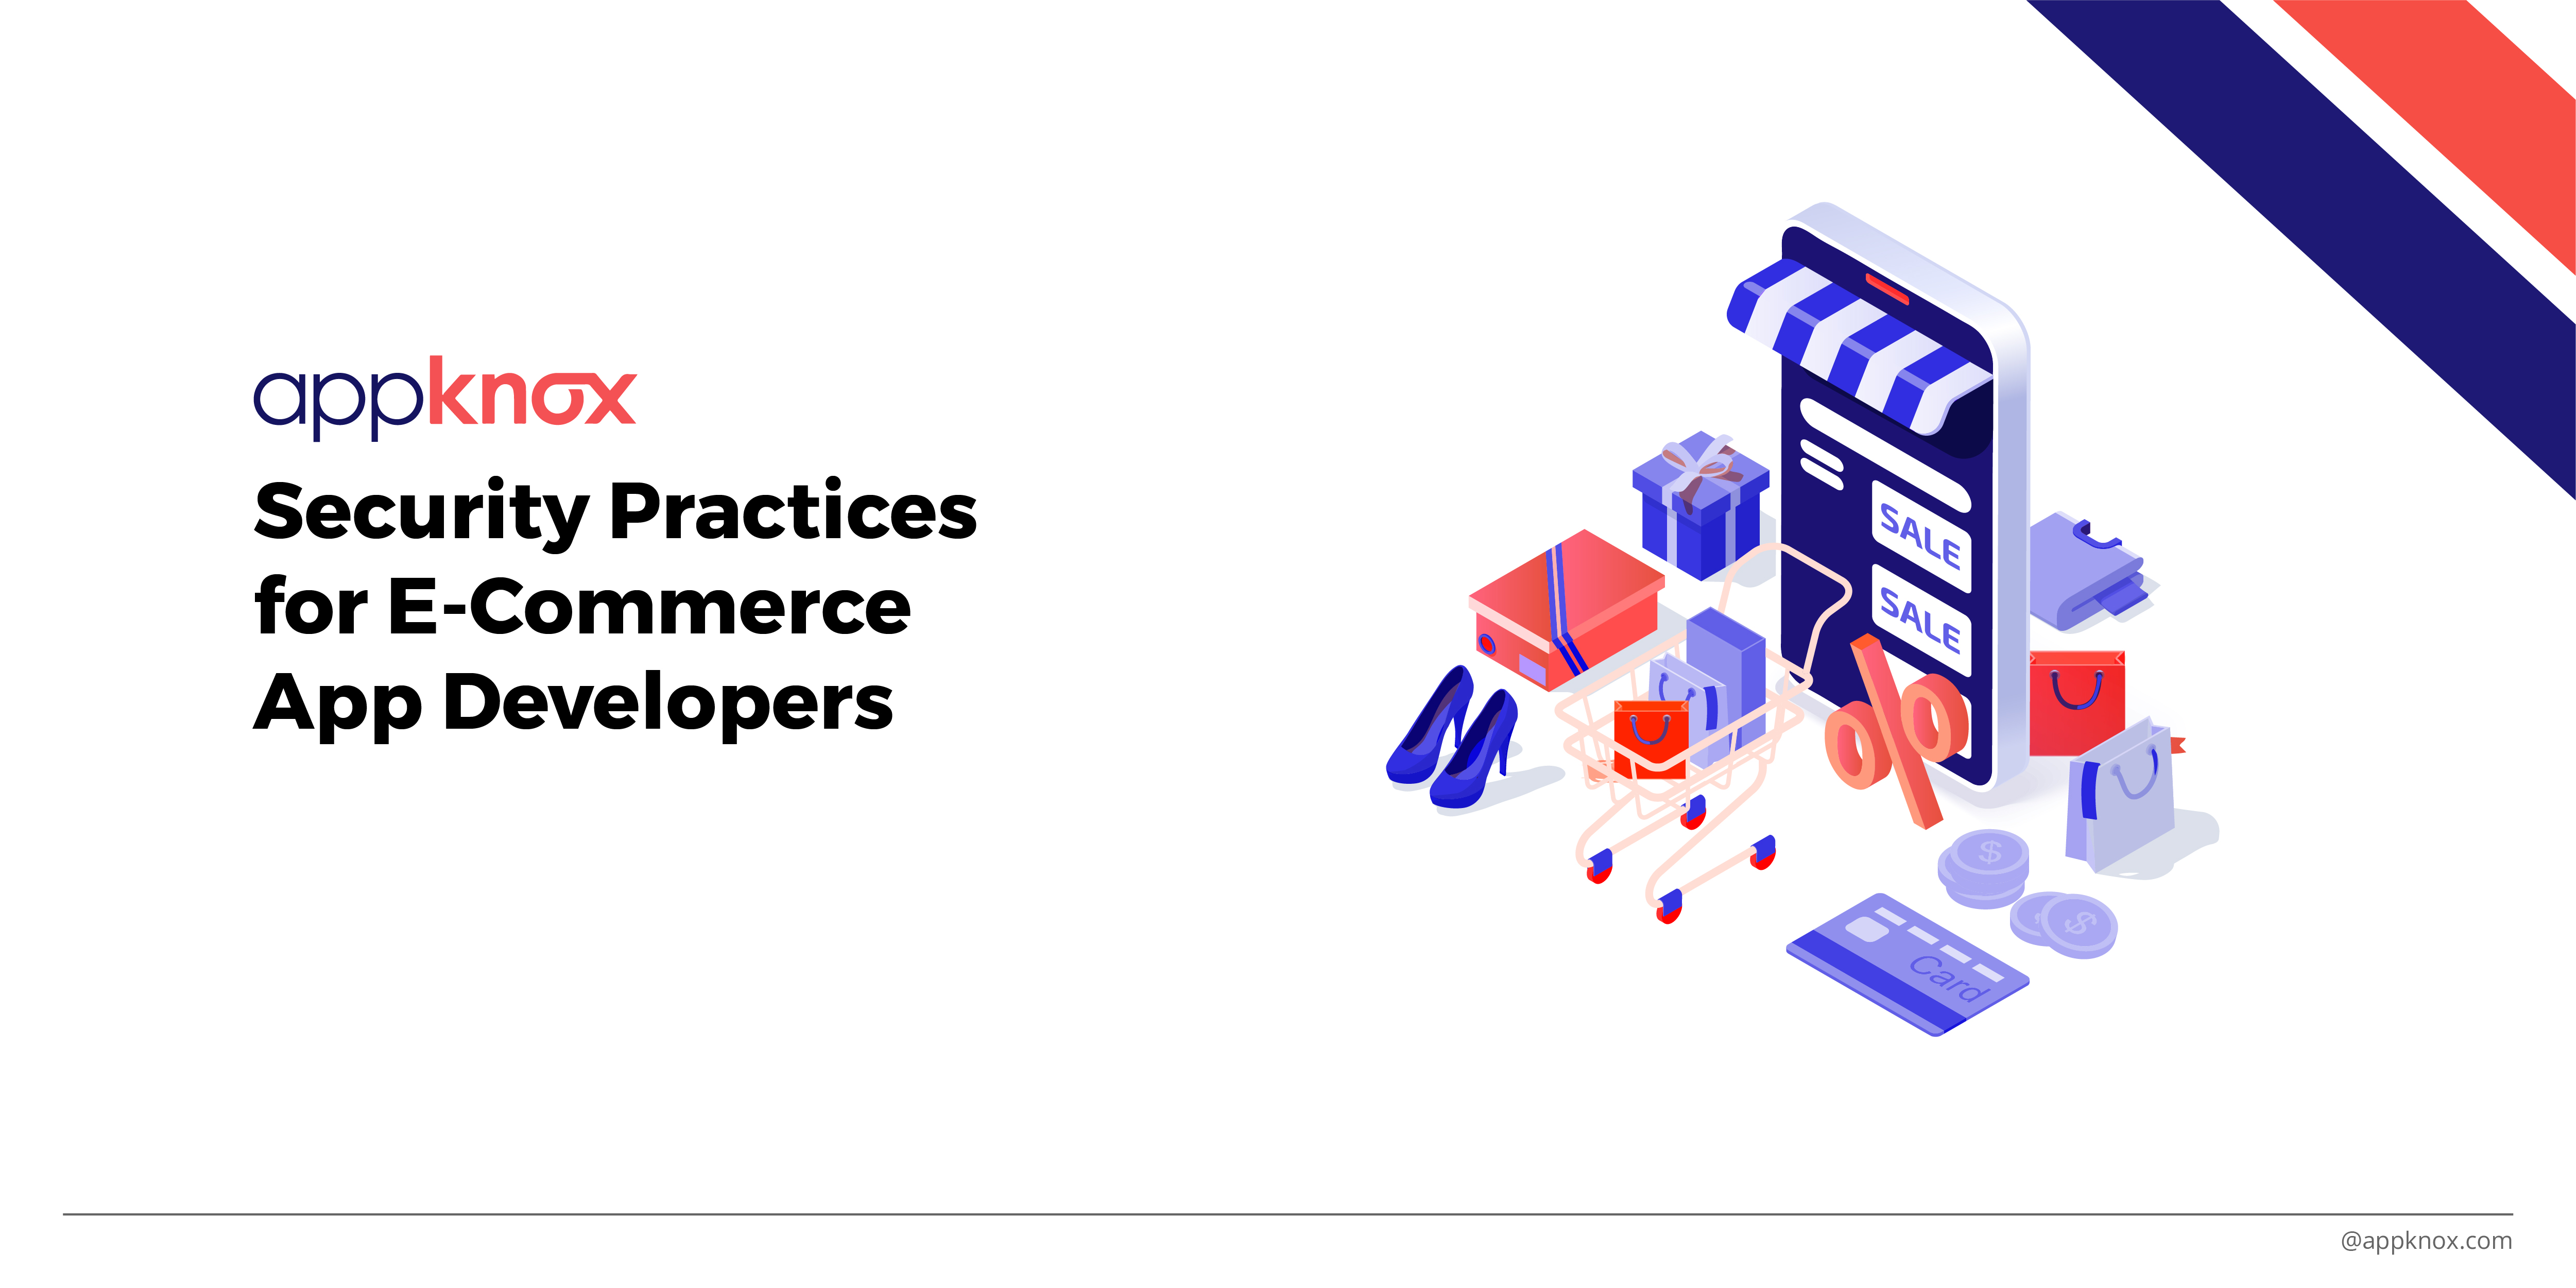 9 Best Security Practices for E-Commerce App Developers